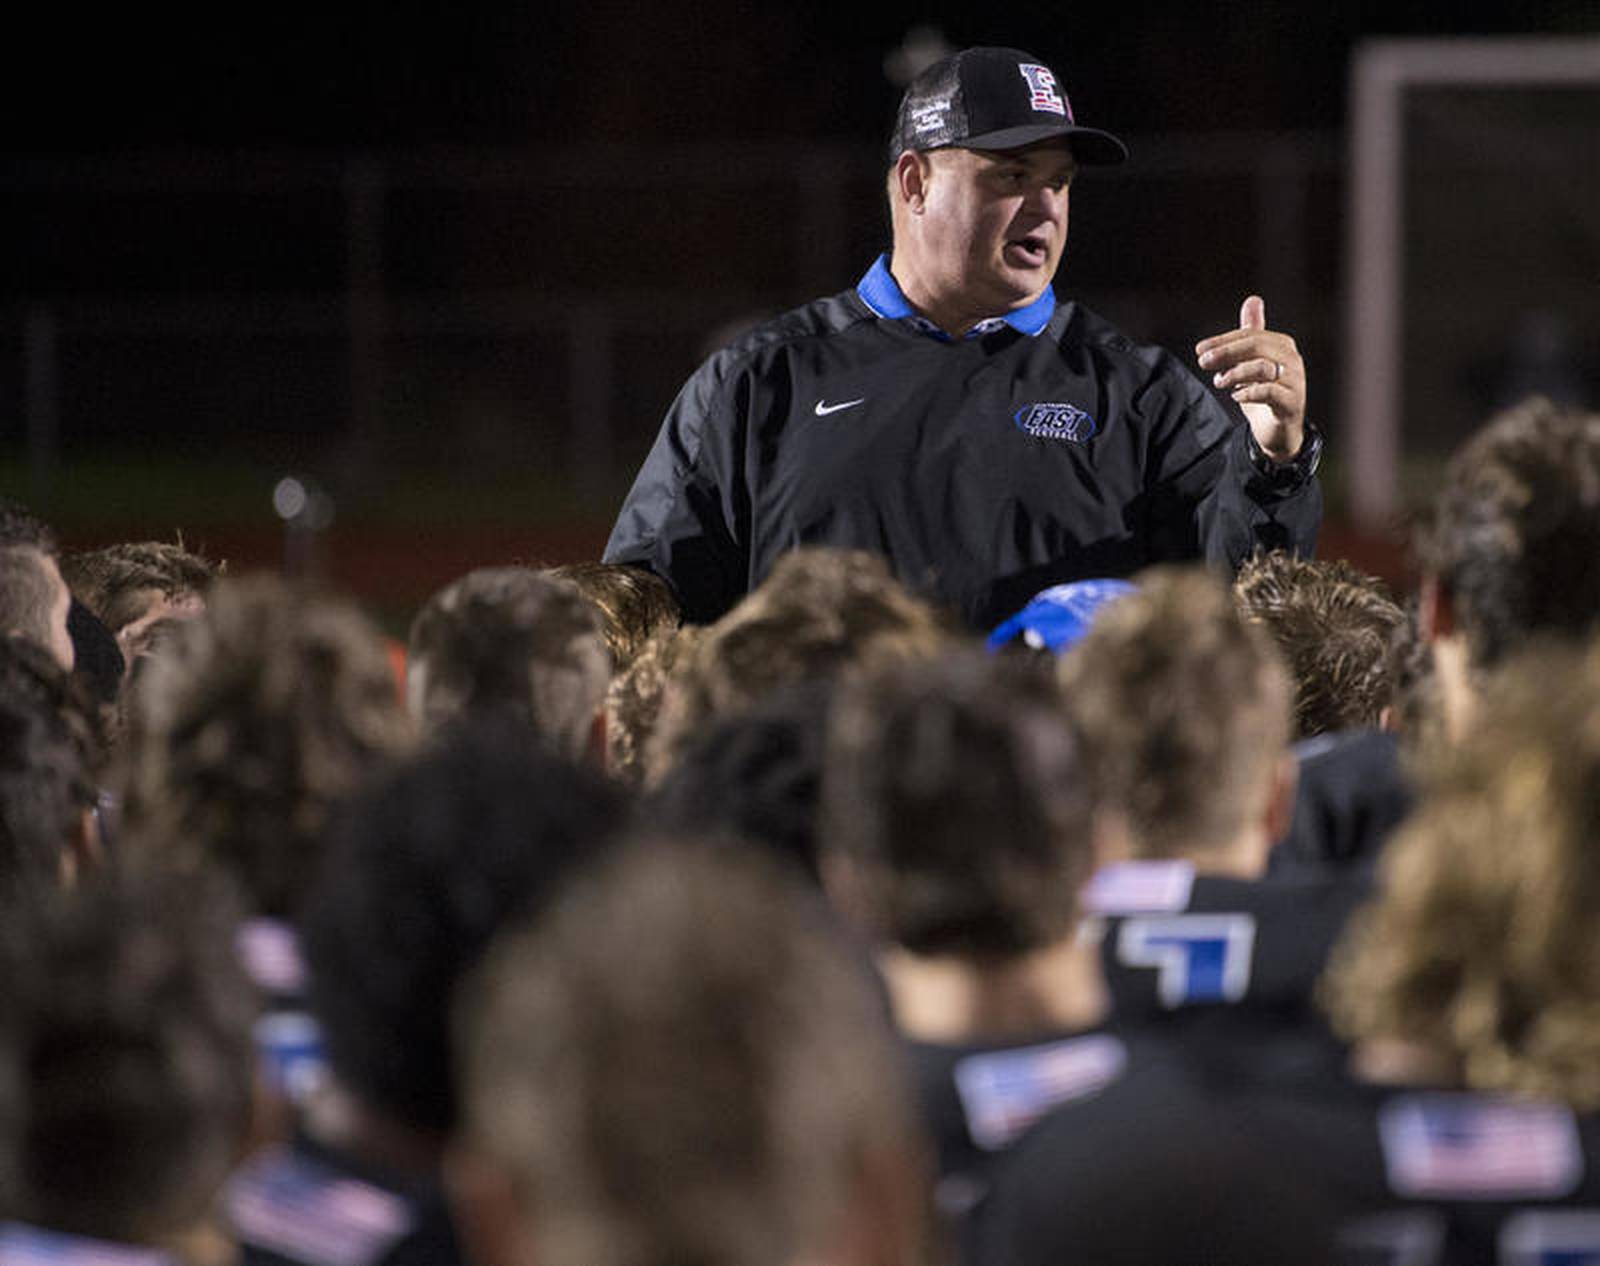 Prep football LincolnWay East is looking for another big year Shaw